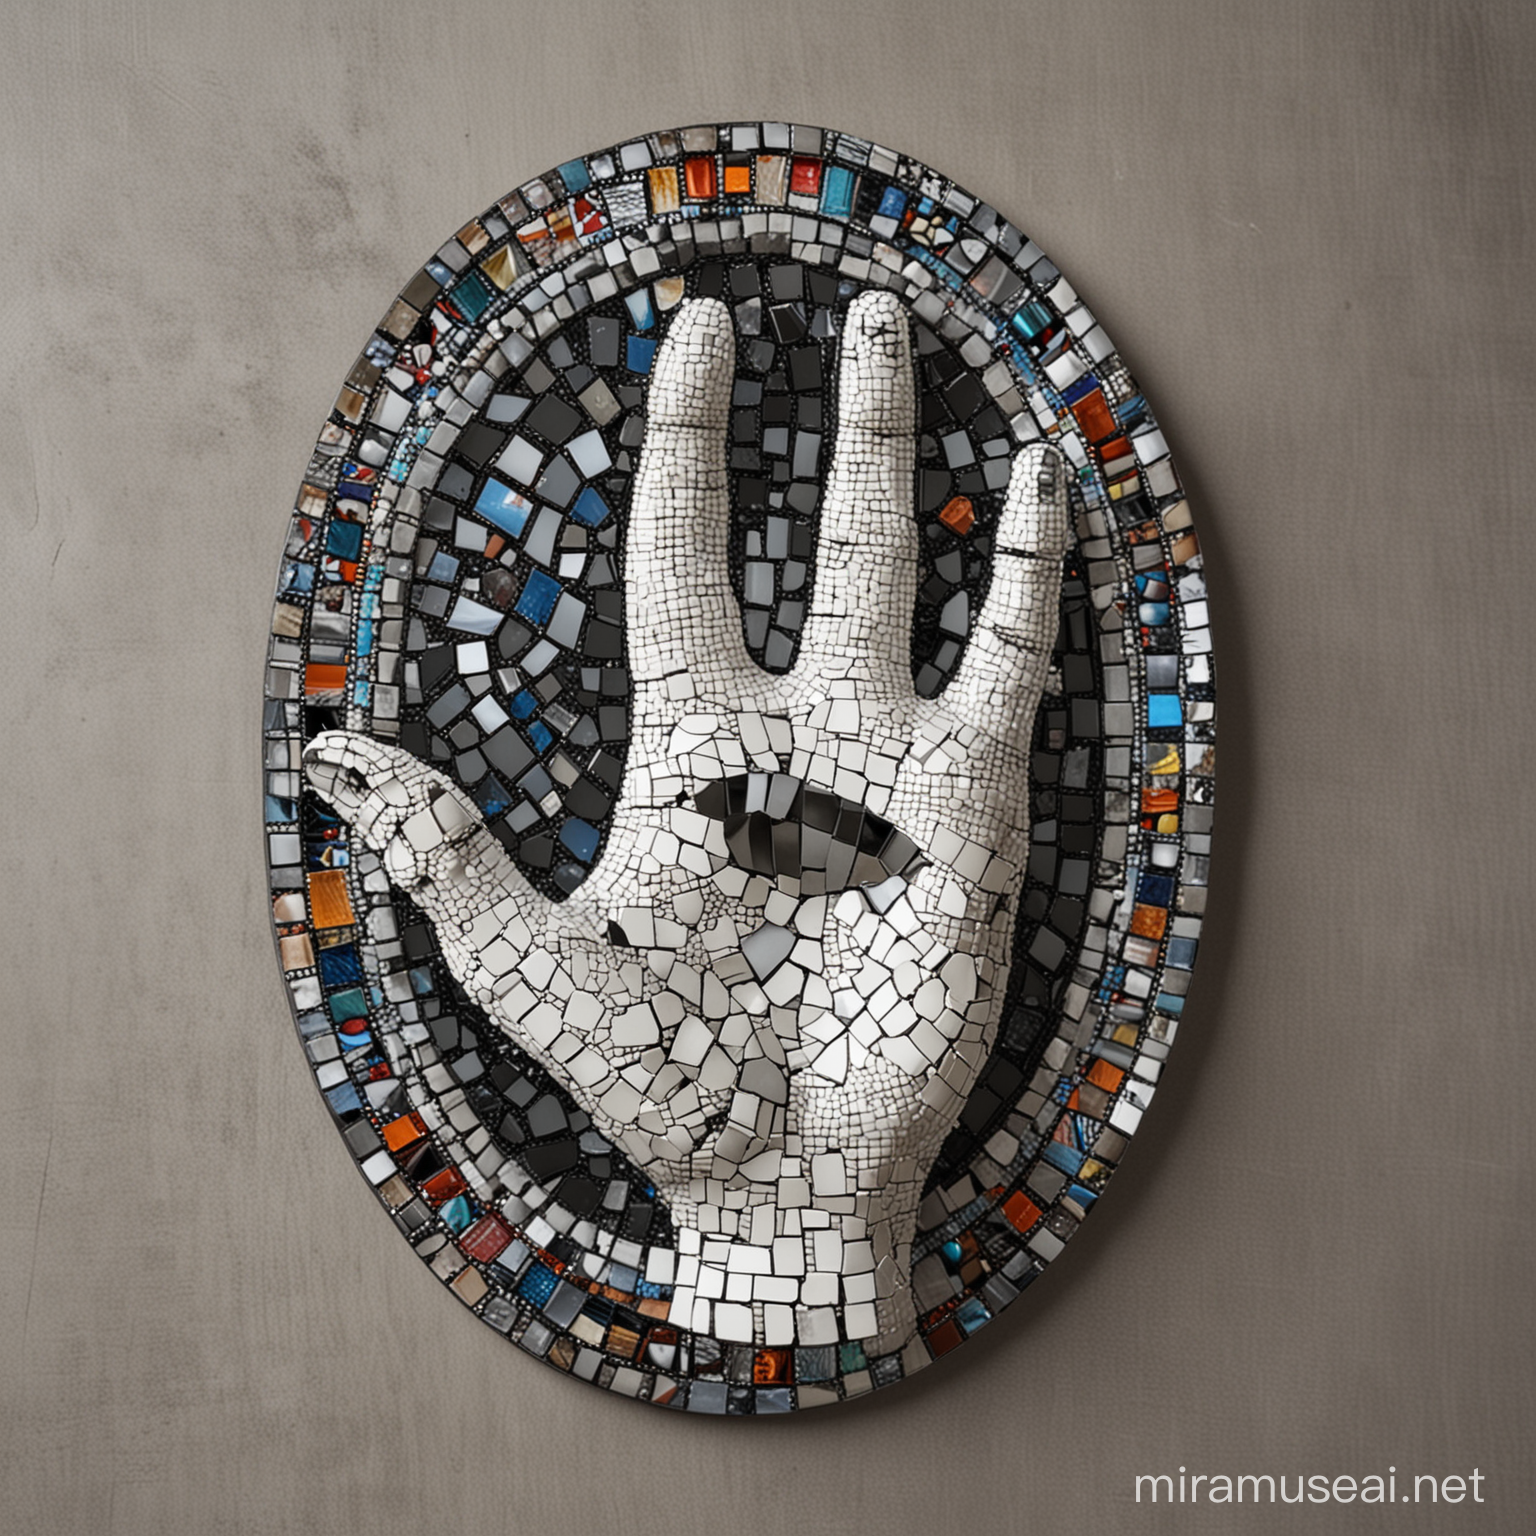 Eerie Halloween Ghost Hand Emerges from Mosaic Mirror